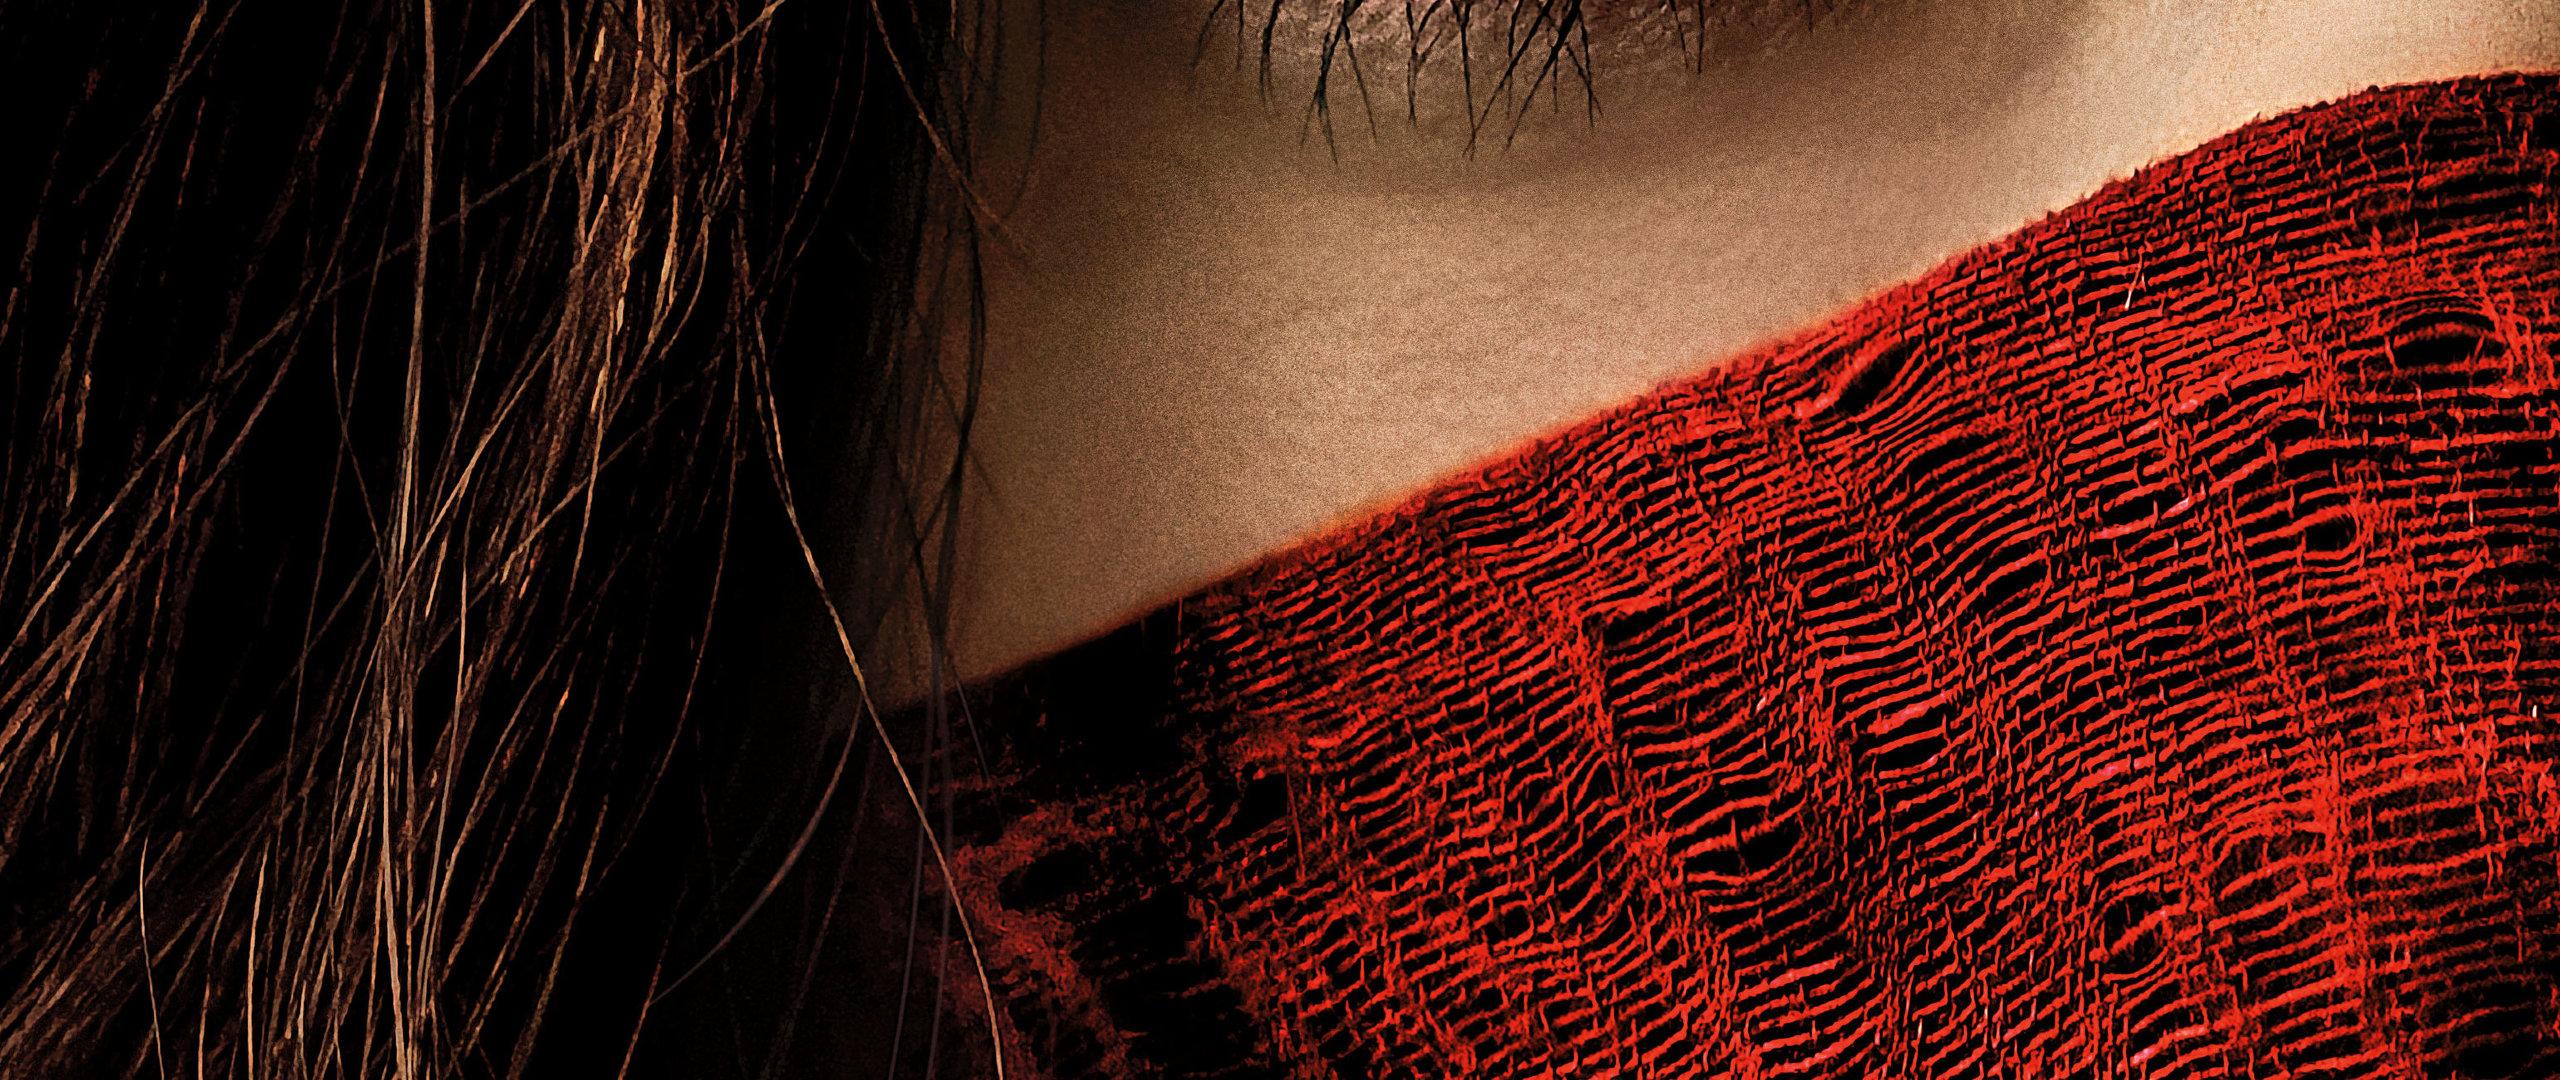 Mortal Engines 2018 Movie First Poster 2560x1080 Resolution Wallpaper, HD Movies 4K Wallpaper, Image, Photo and Background